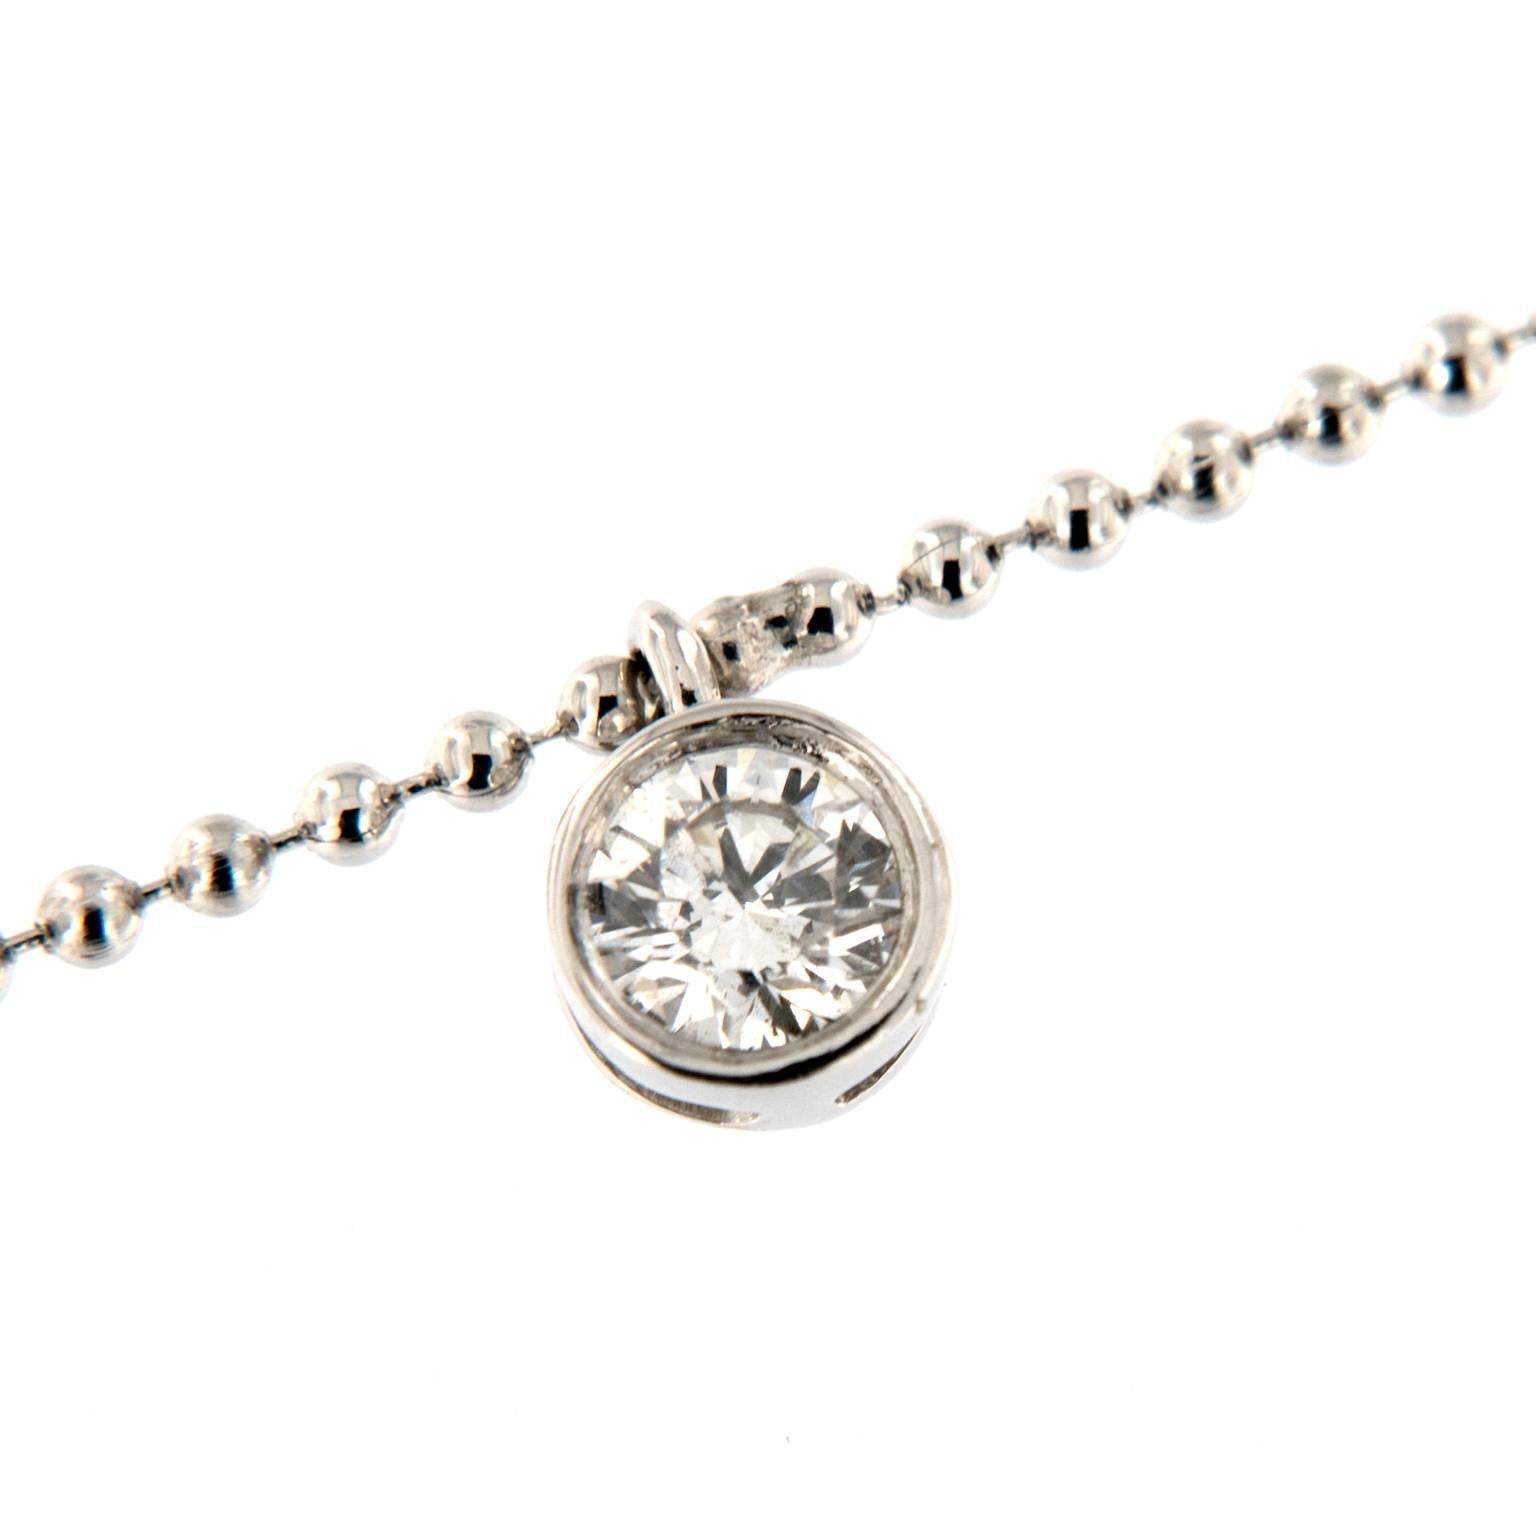 This 14k white gold necklace provides a touch of sparkle and sway for every day.  Seven Bezel-set round brilliant-cut diamonds dangle from an adjustable 16 inch beaded chain with a lobster clasp. Weighs 3.3 grams. Necklace can be worn as a choker or